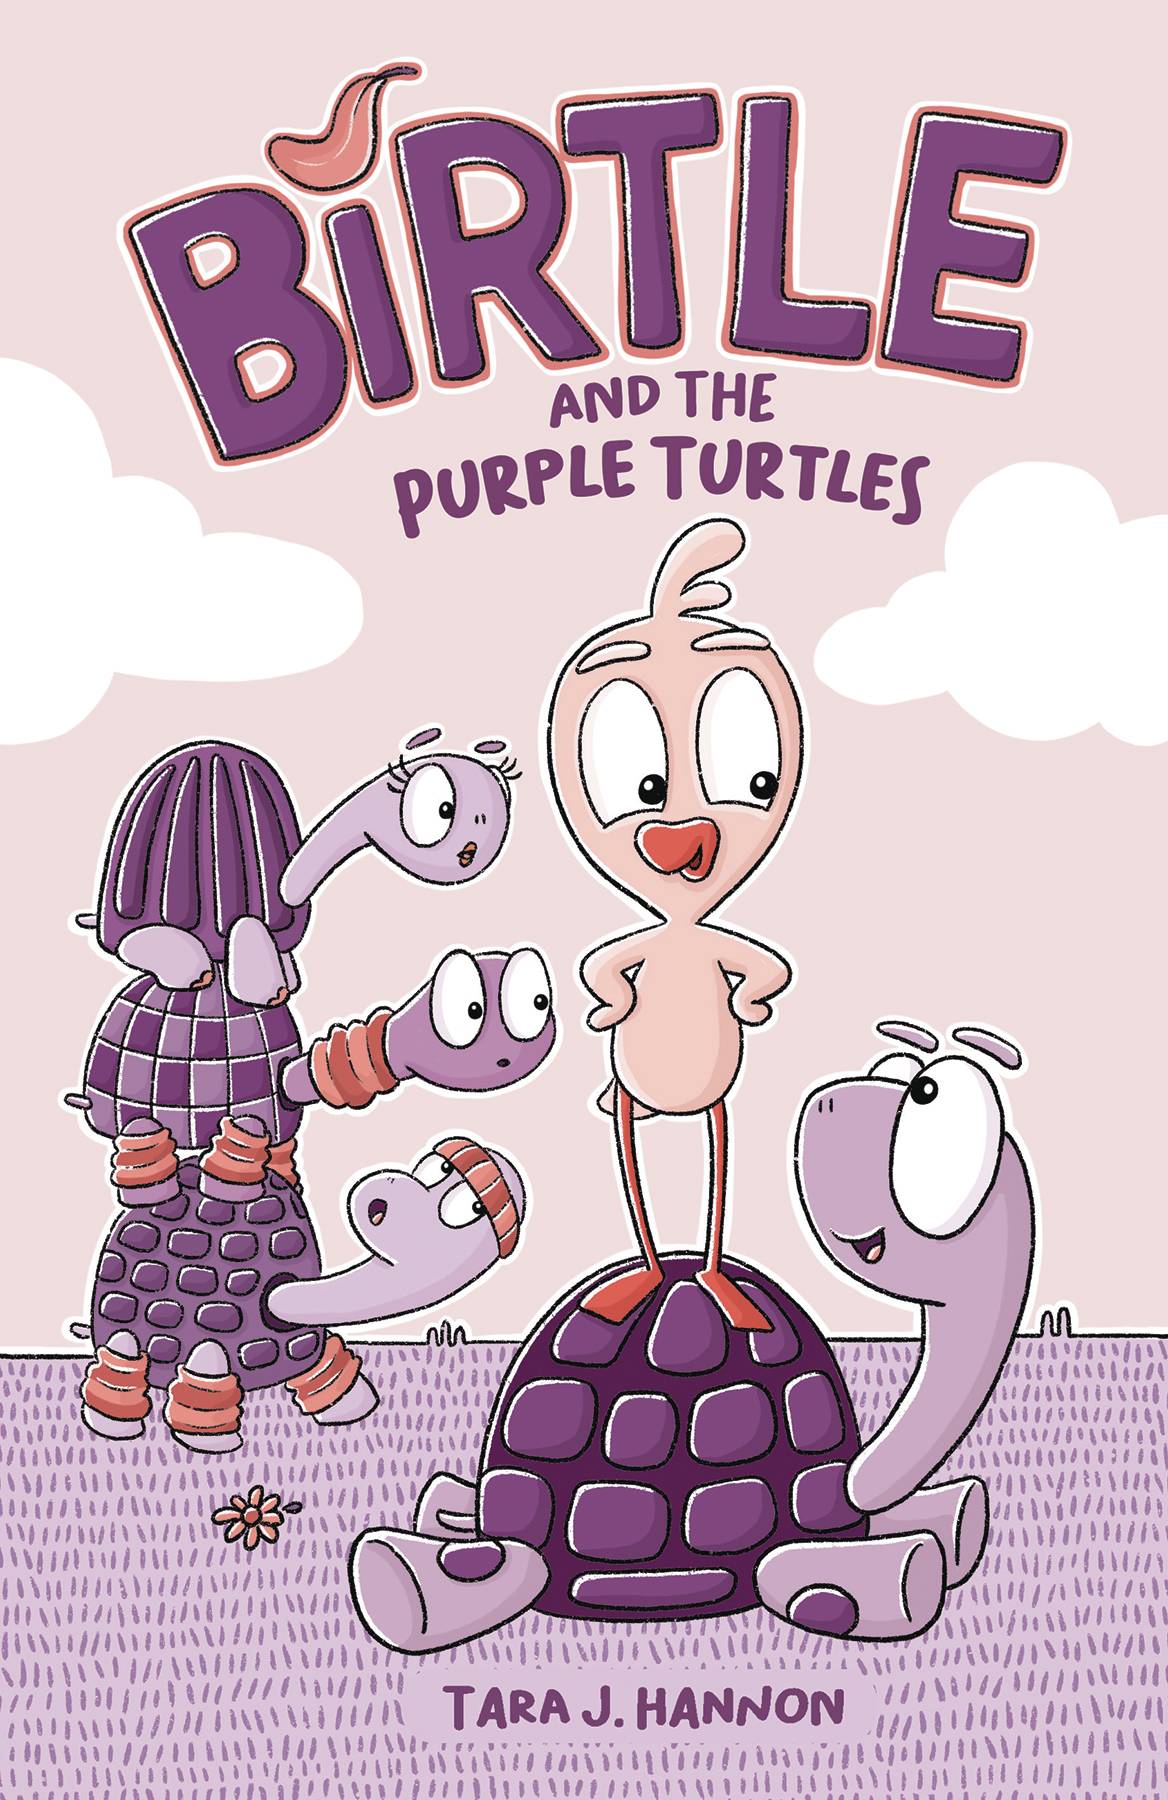 BIRTLE AND THE PURPLE TURTLES TP